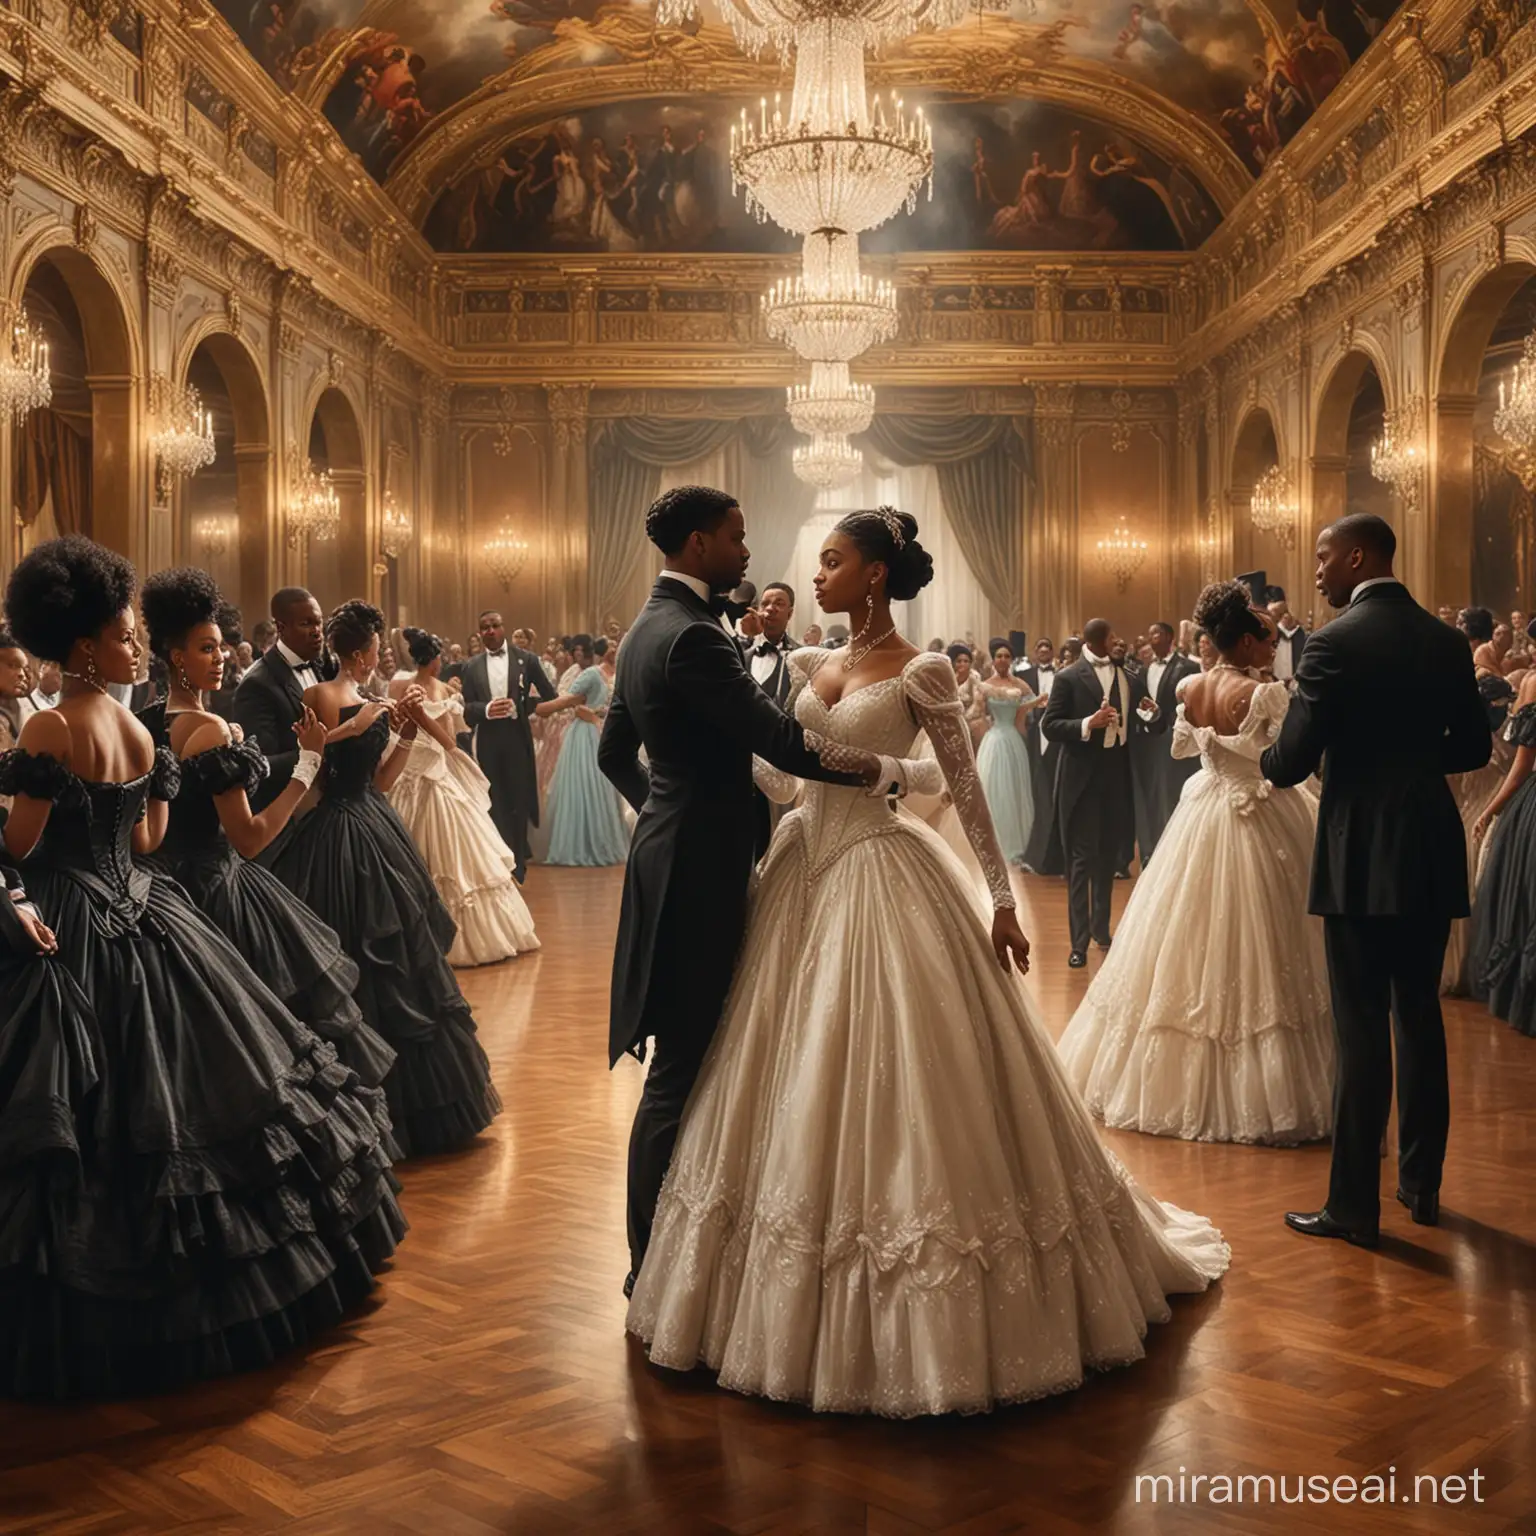 An image of black women and men in victorian decadent ballroom. The women are dressed in glamorous victorian evening gowns and the men in regal black tie. The imagine is like an oil painting. They are dancing  and the ballroom is massive. There is also a black orchestra in the background. 